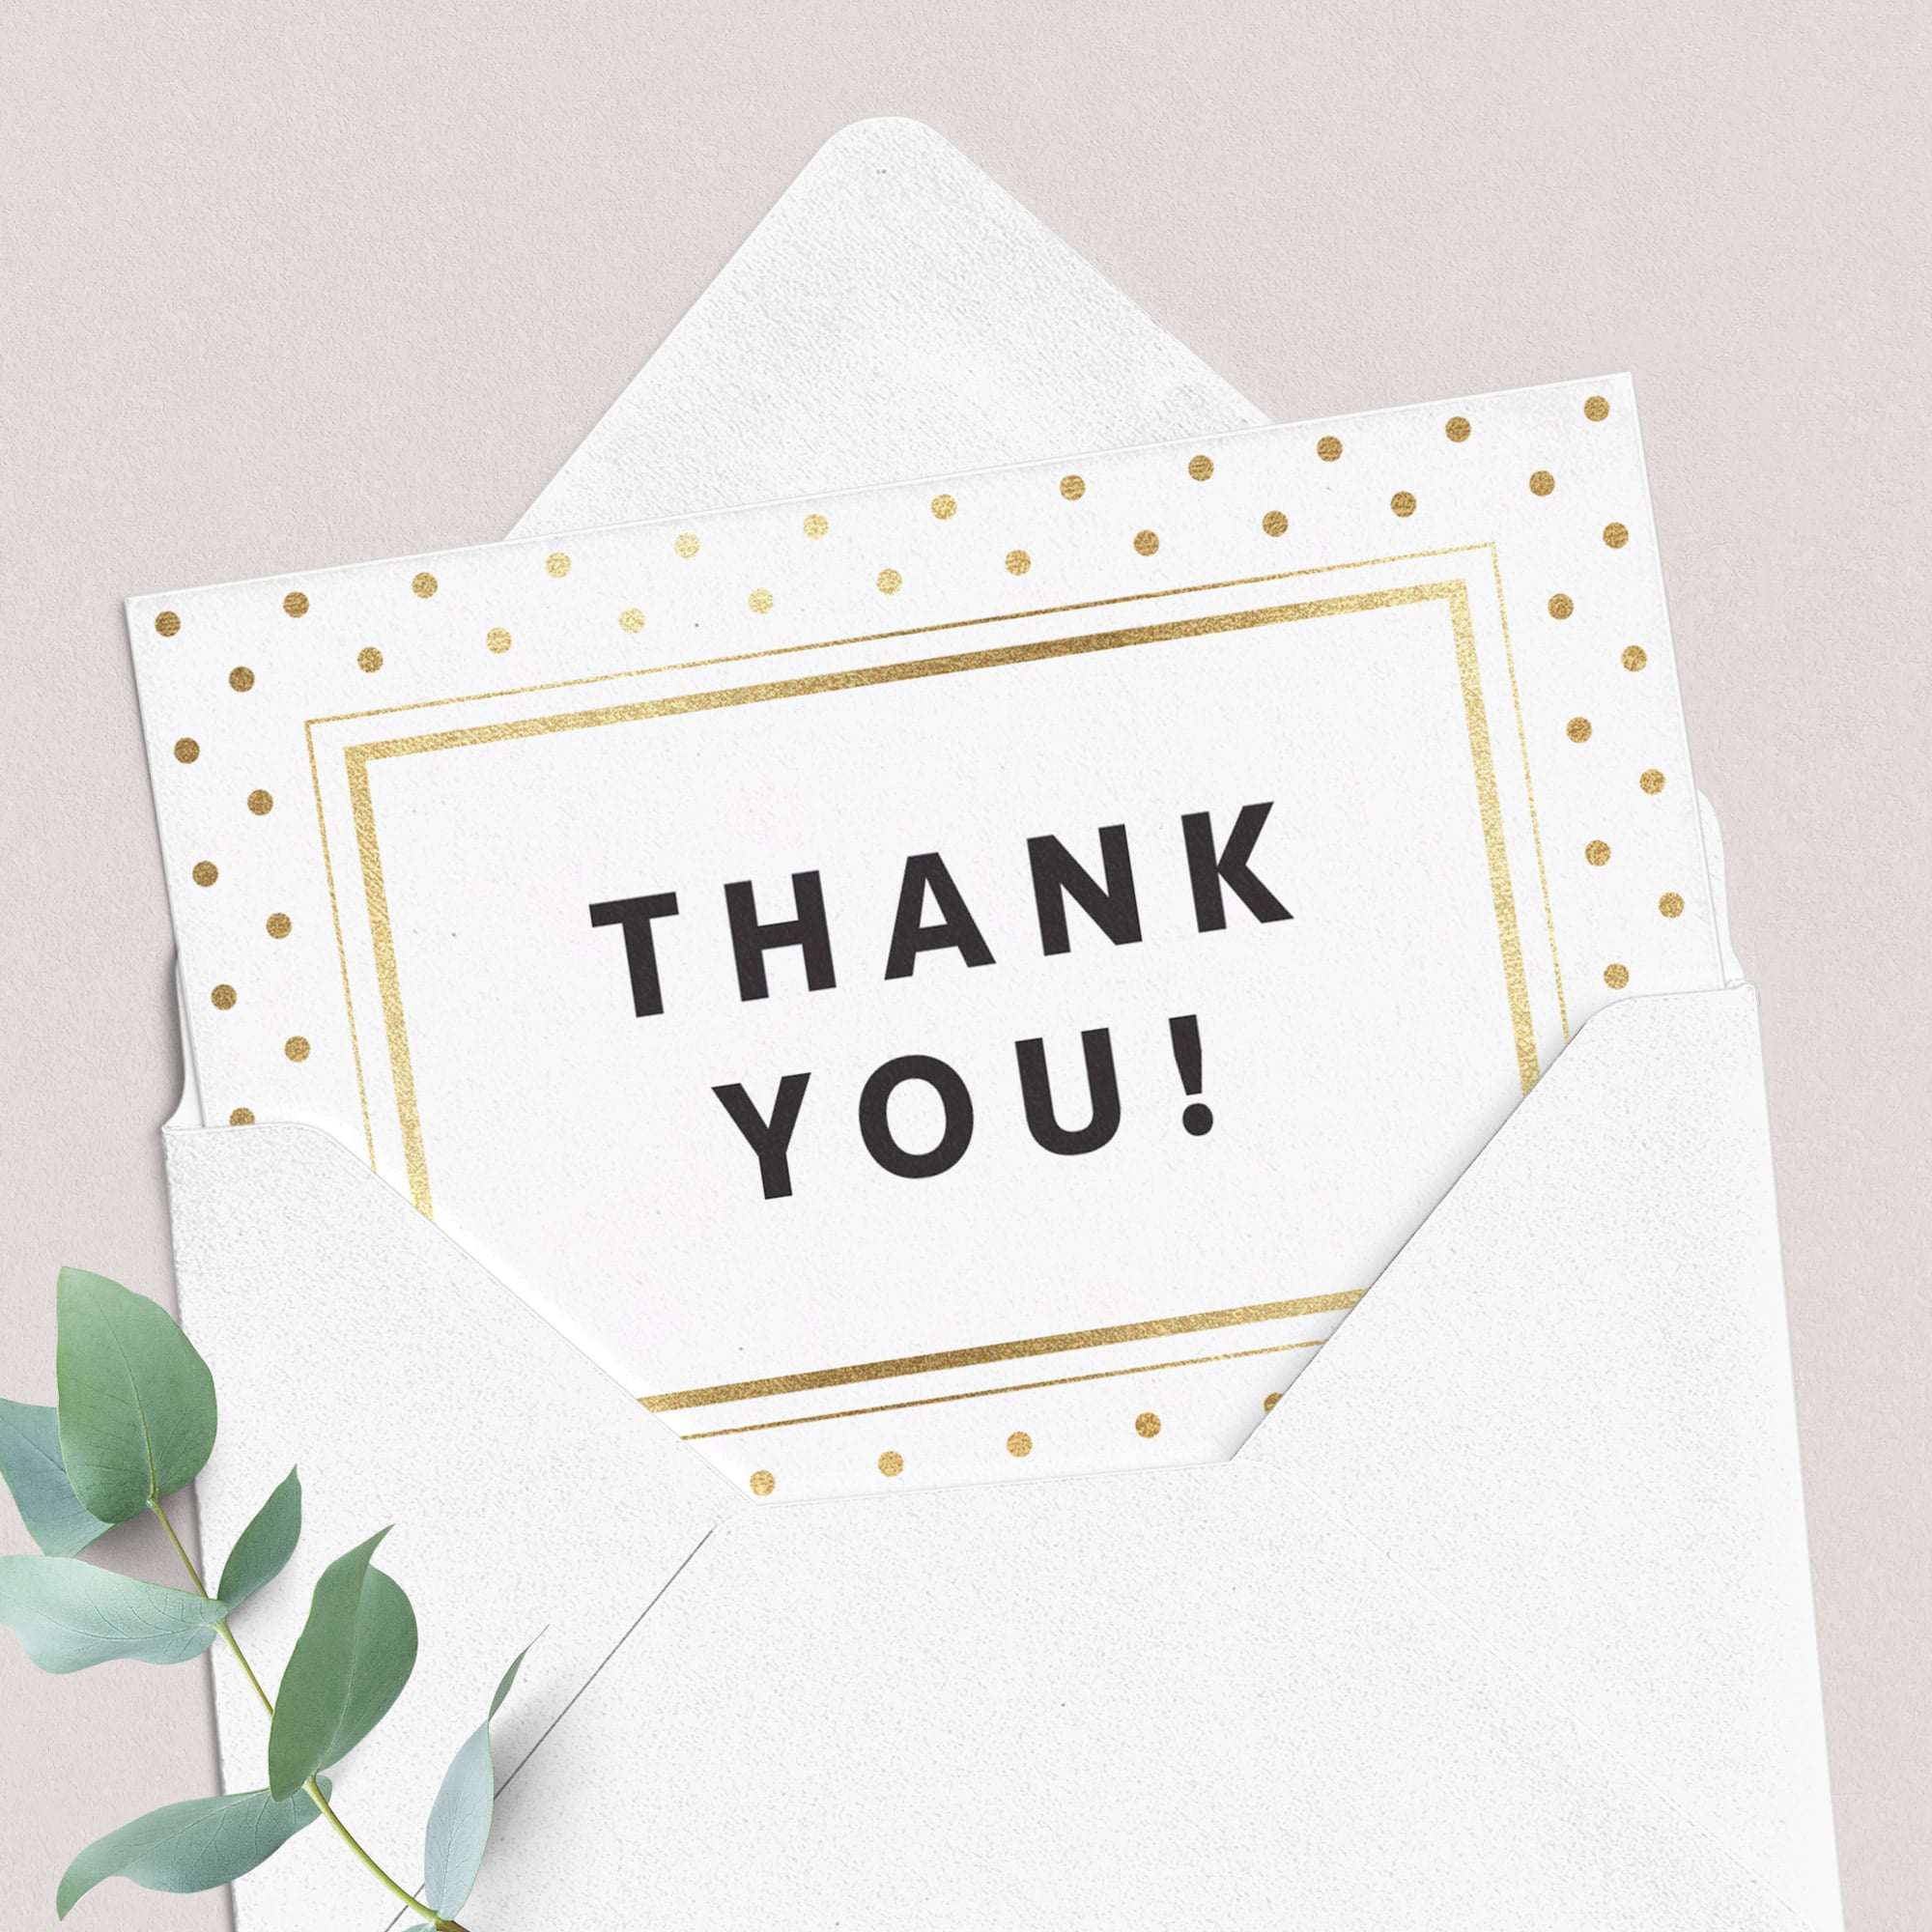 Printable folded thank you card with gold glitter by LittleSizzle